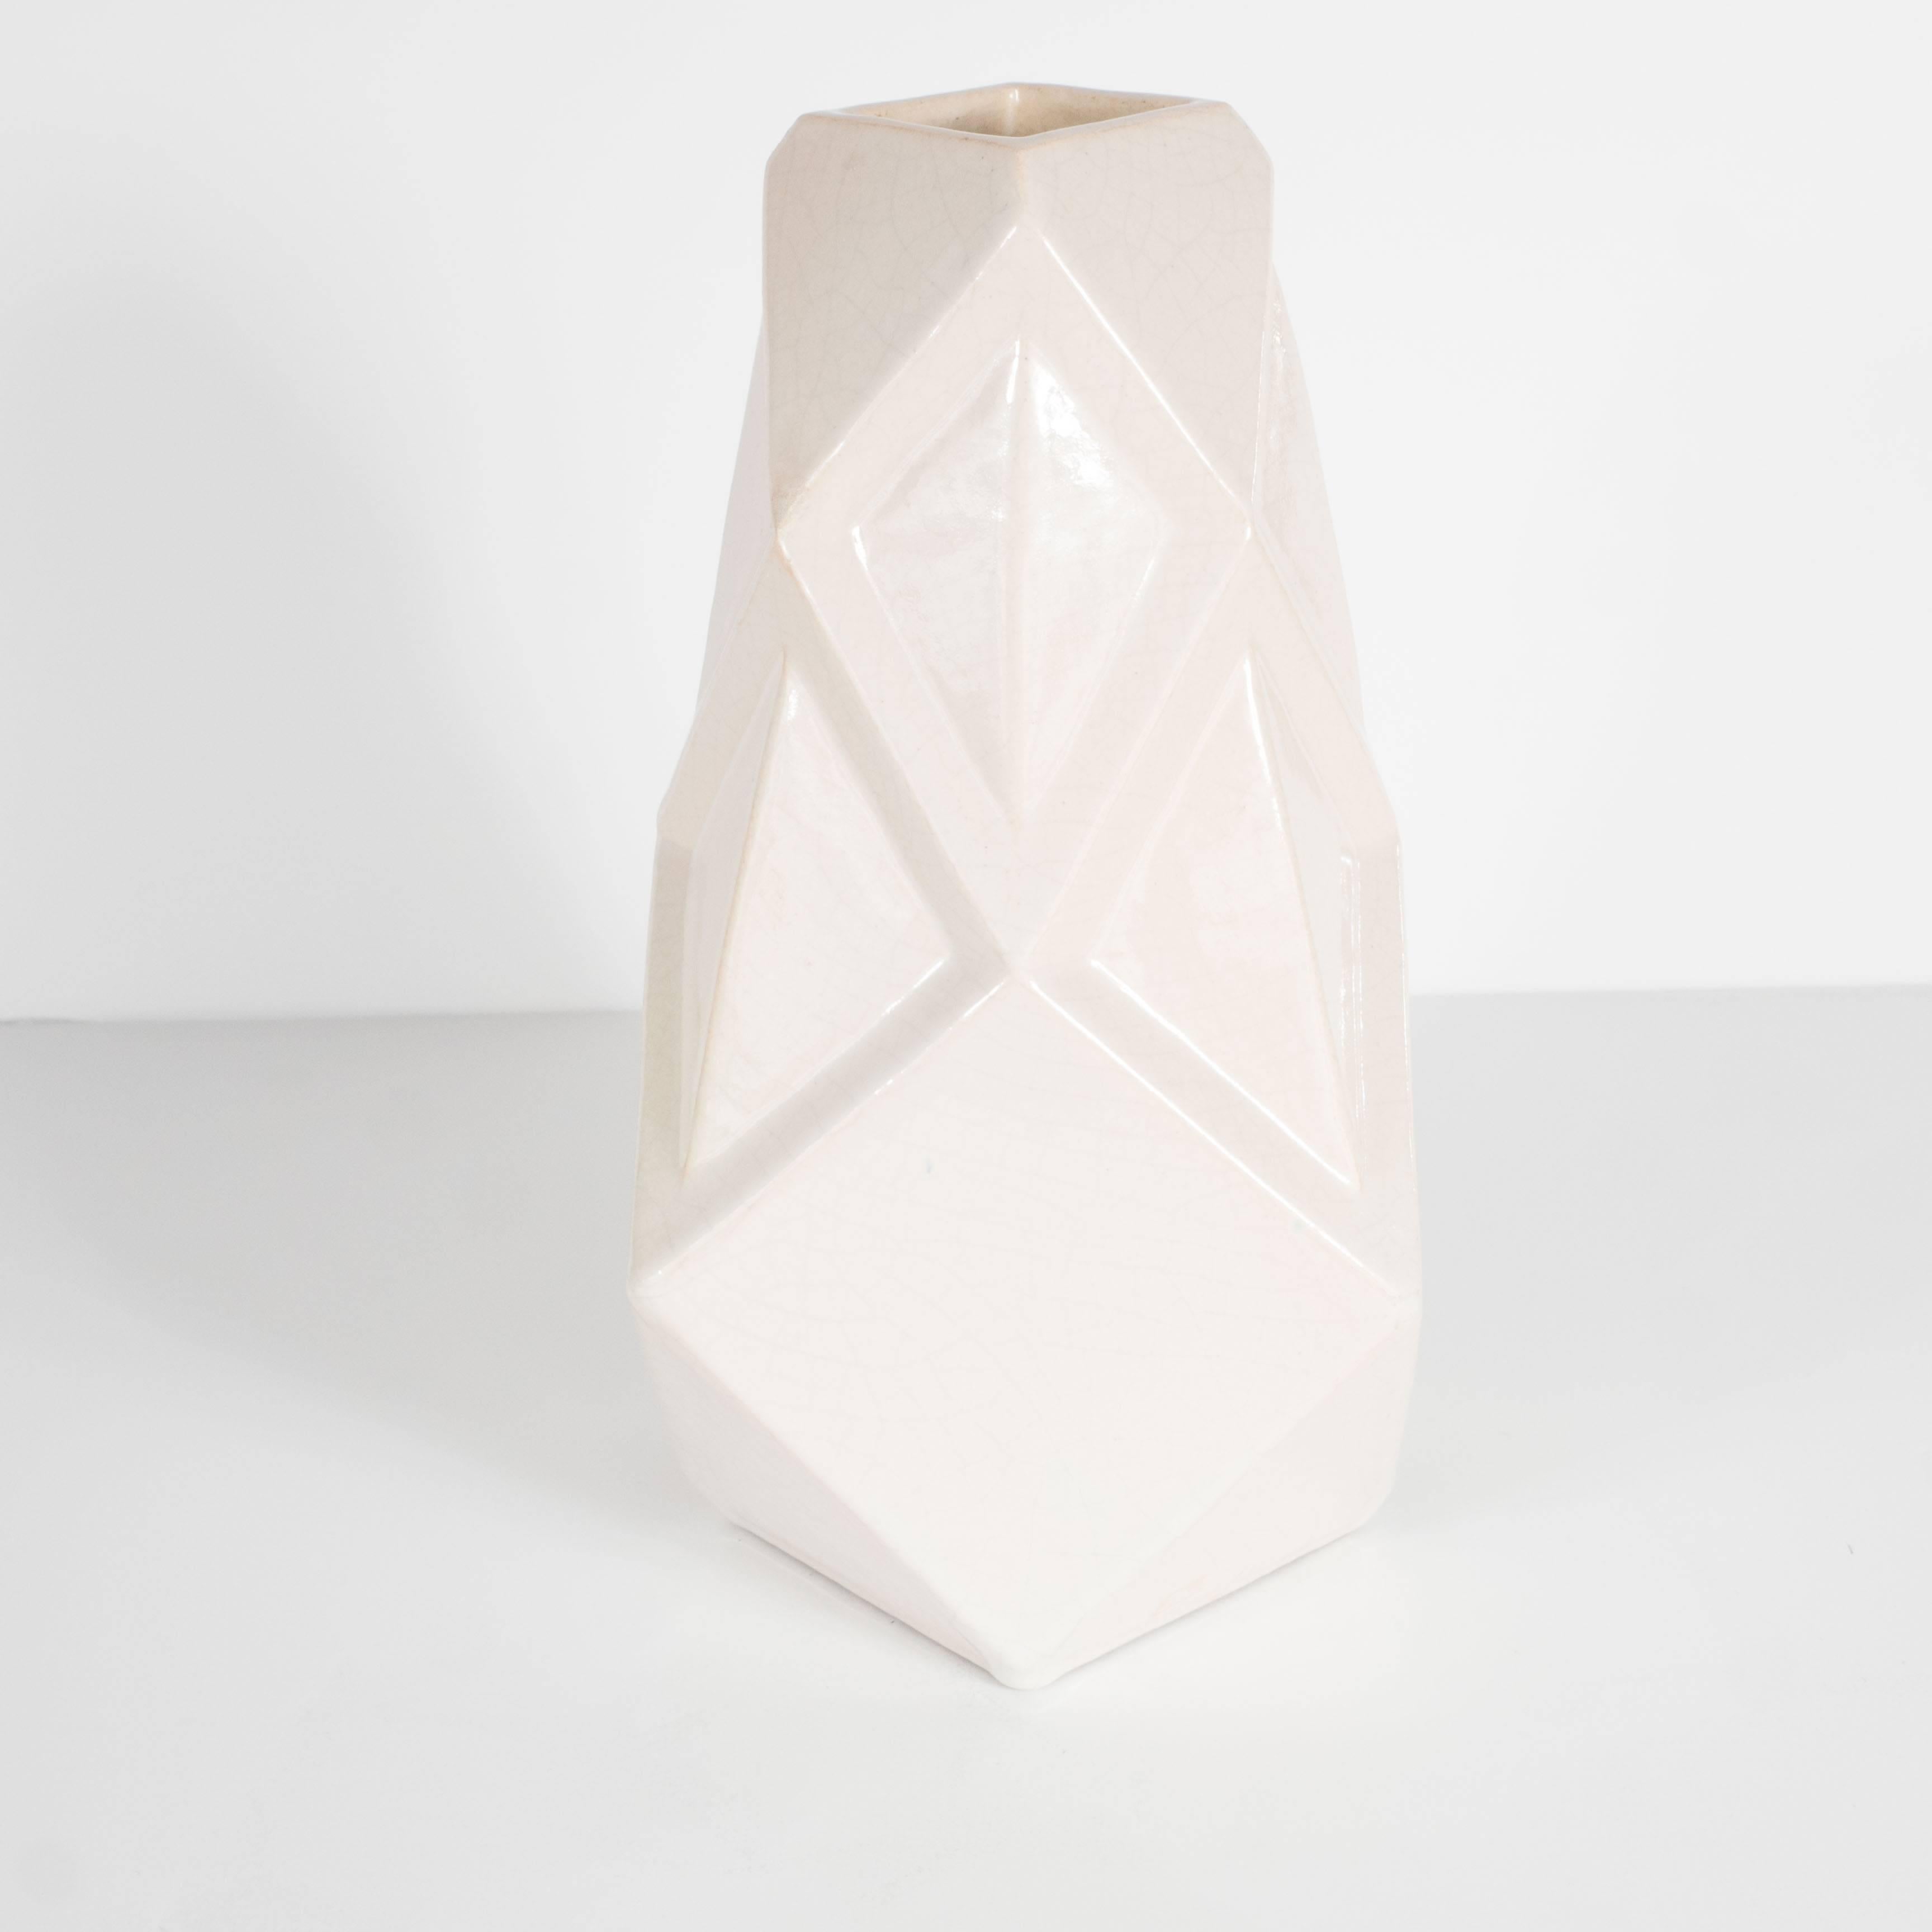 This perfect vase features a cubist relief geometric design in a crème crackle glaze finish. A wonderful decorative as well as functional object, great in a bookcase or as a stand alone on a table. It bears the mark made in France Boulogne.